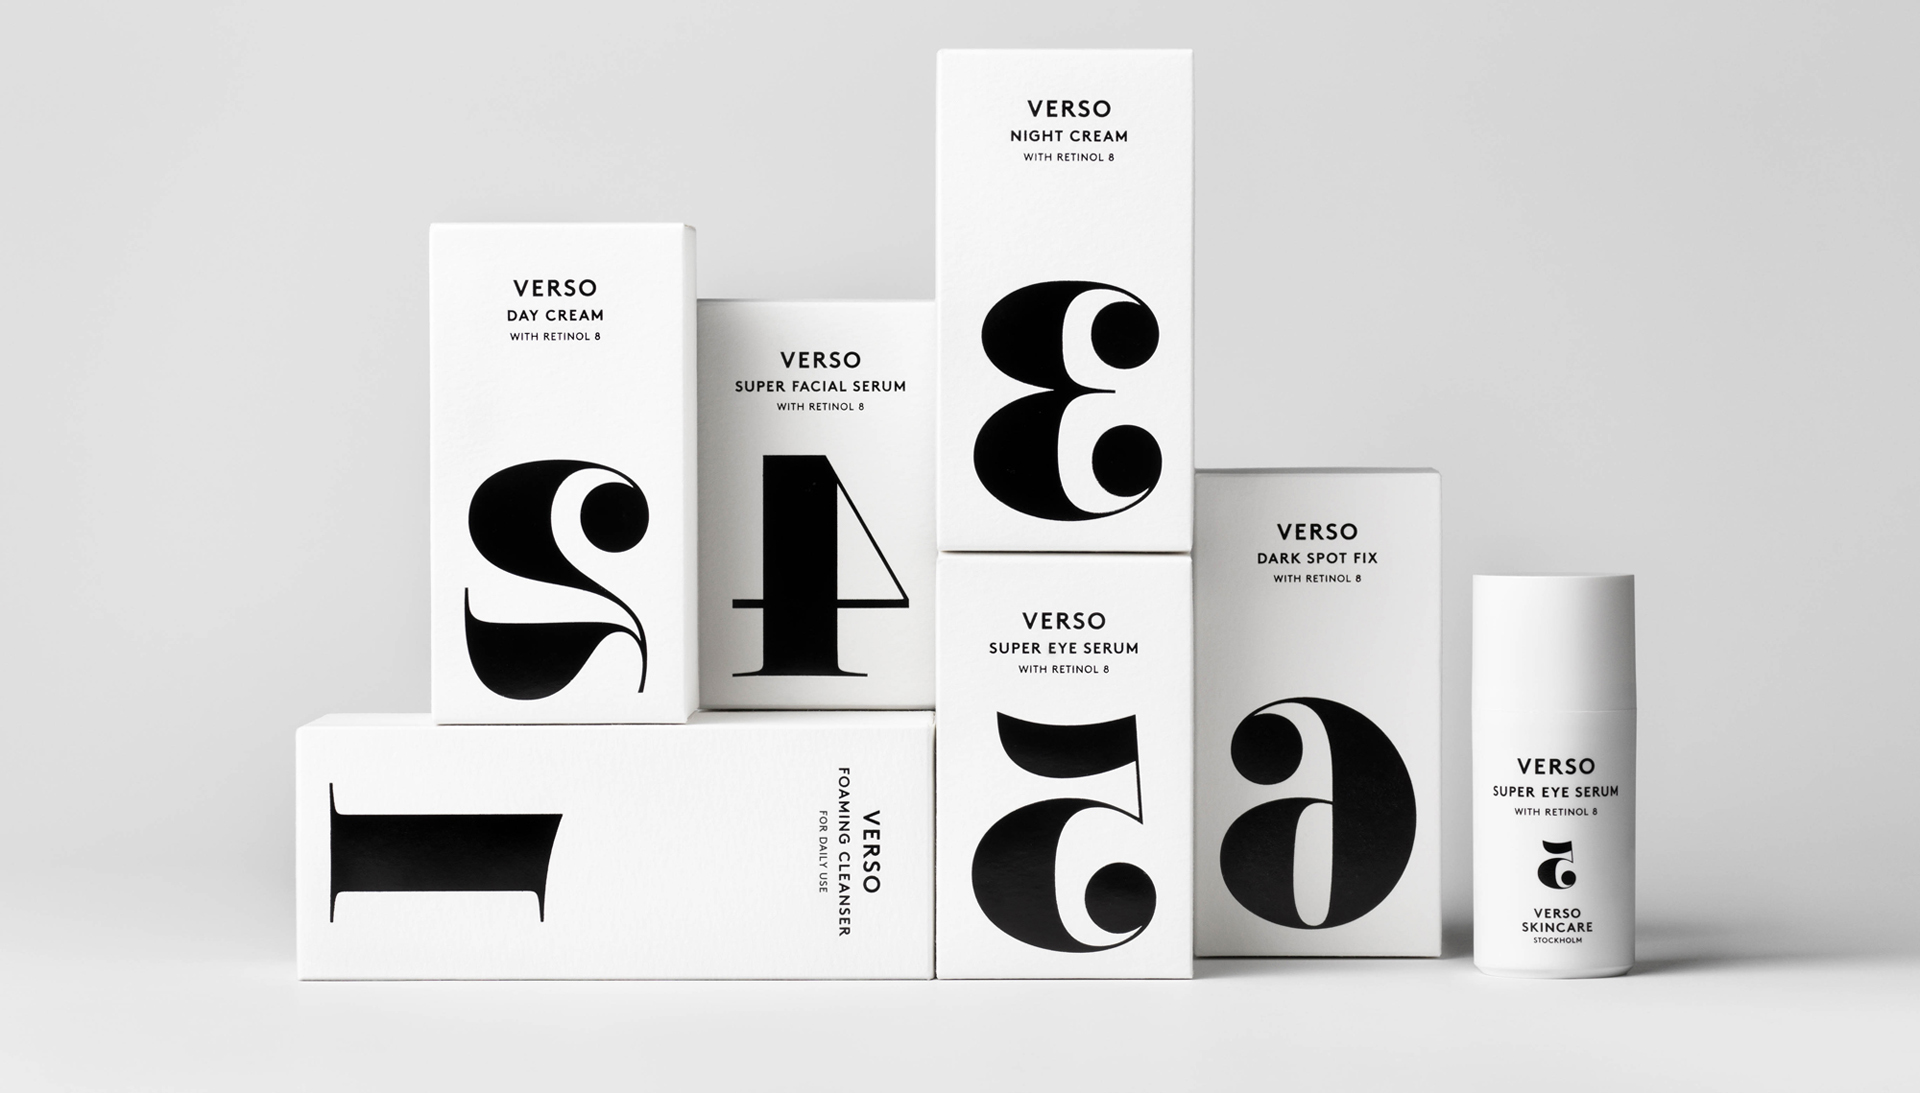 Packaging showing contrast in graphic design